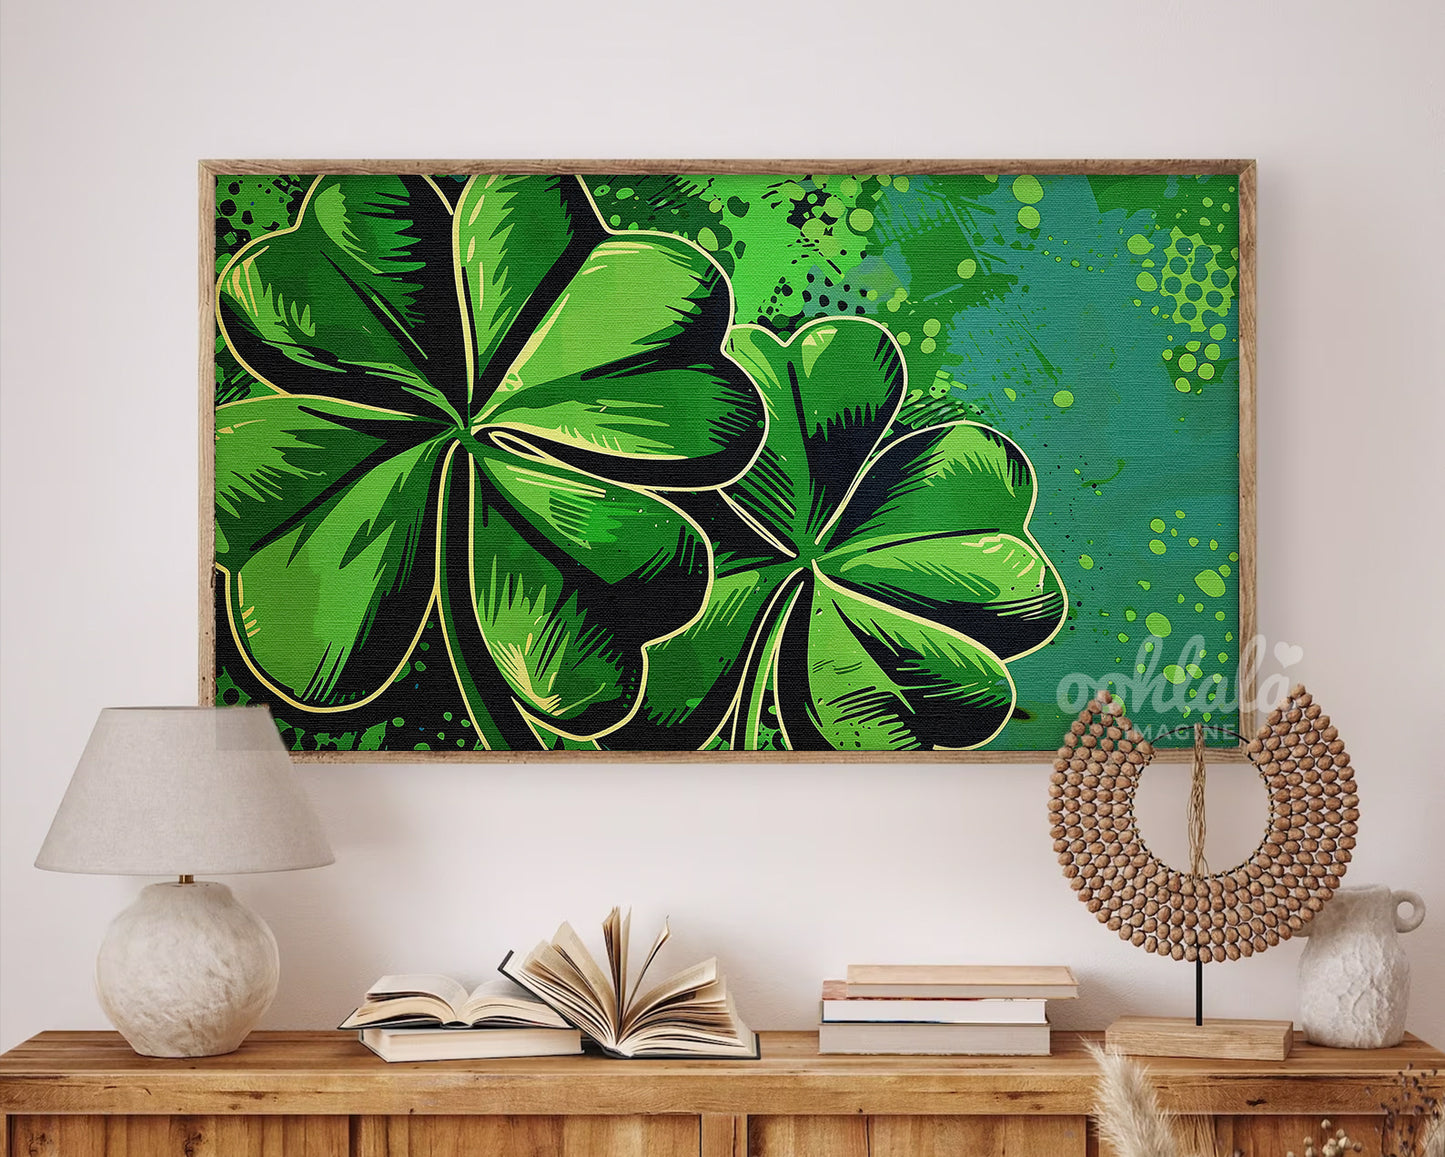 Pair of Clovers Abstract Painting Frame TV Art Wallpaper